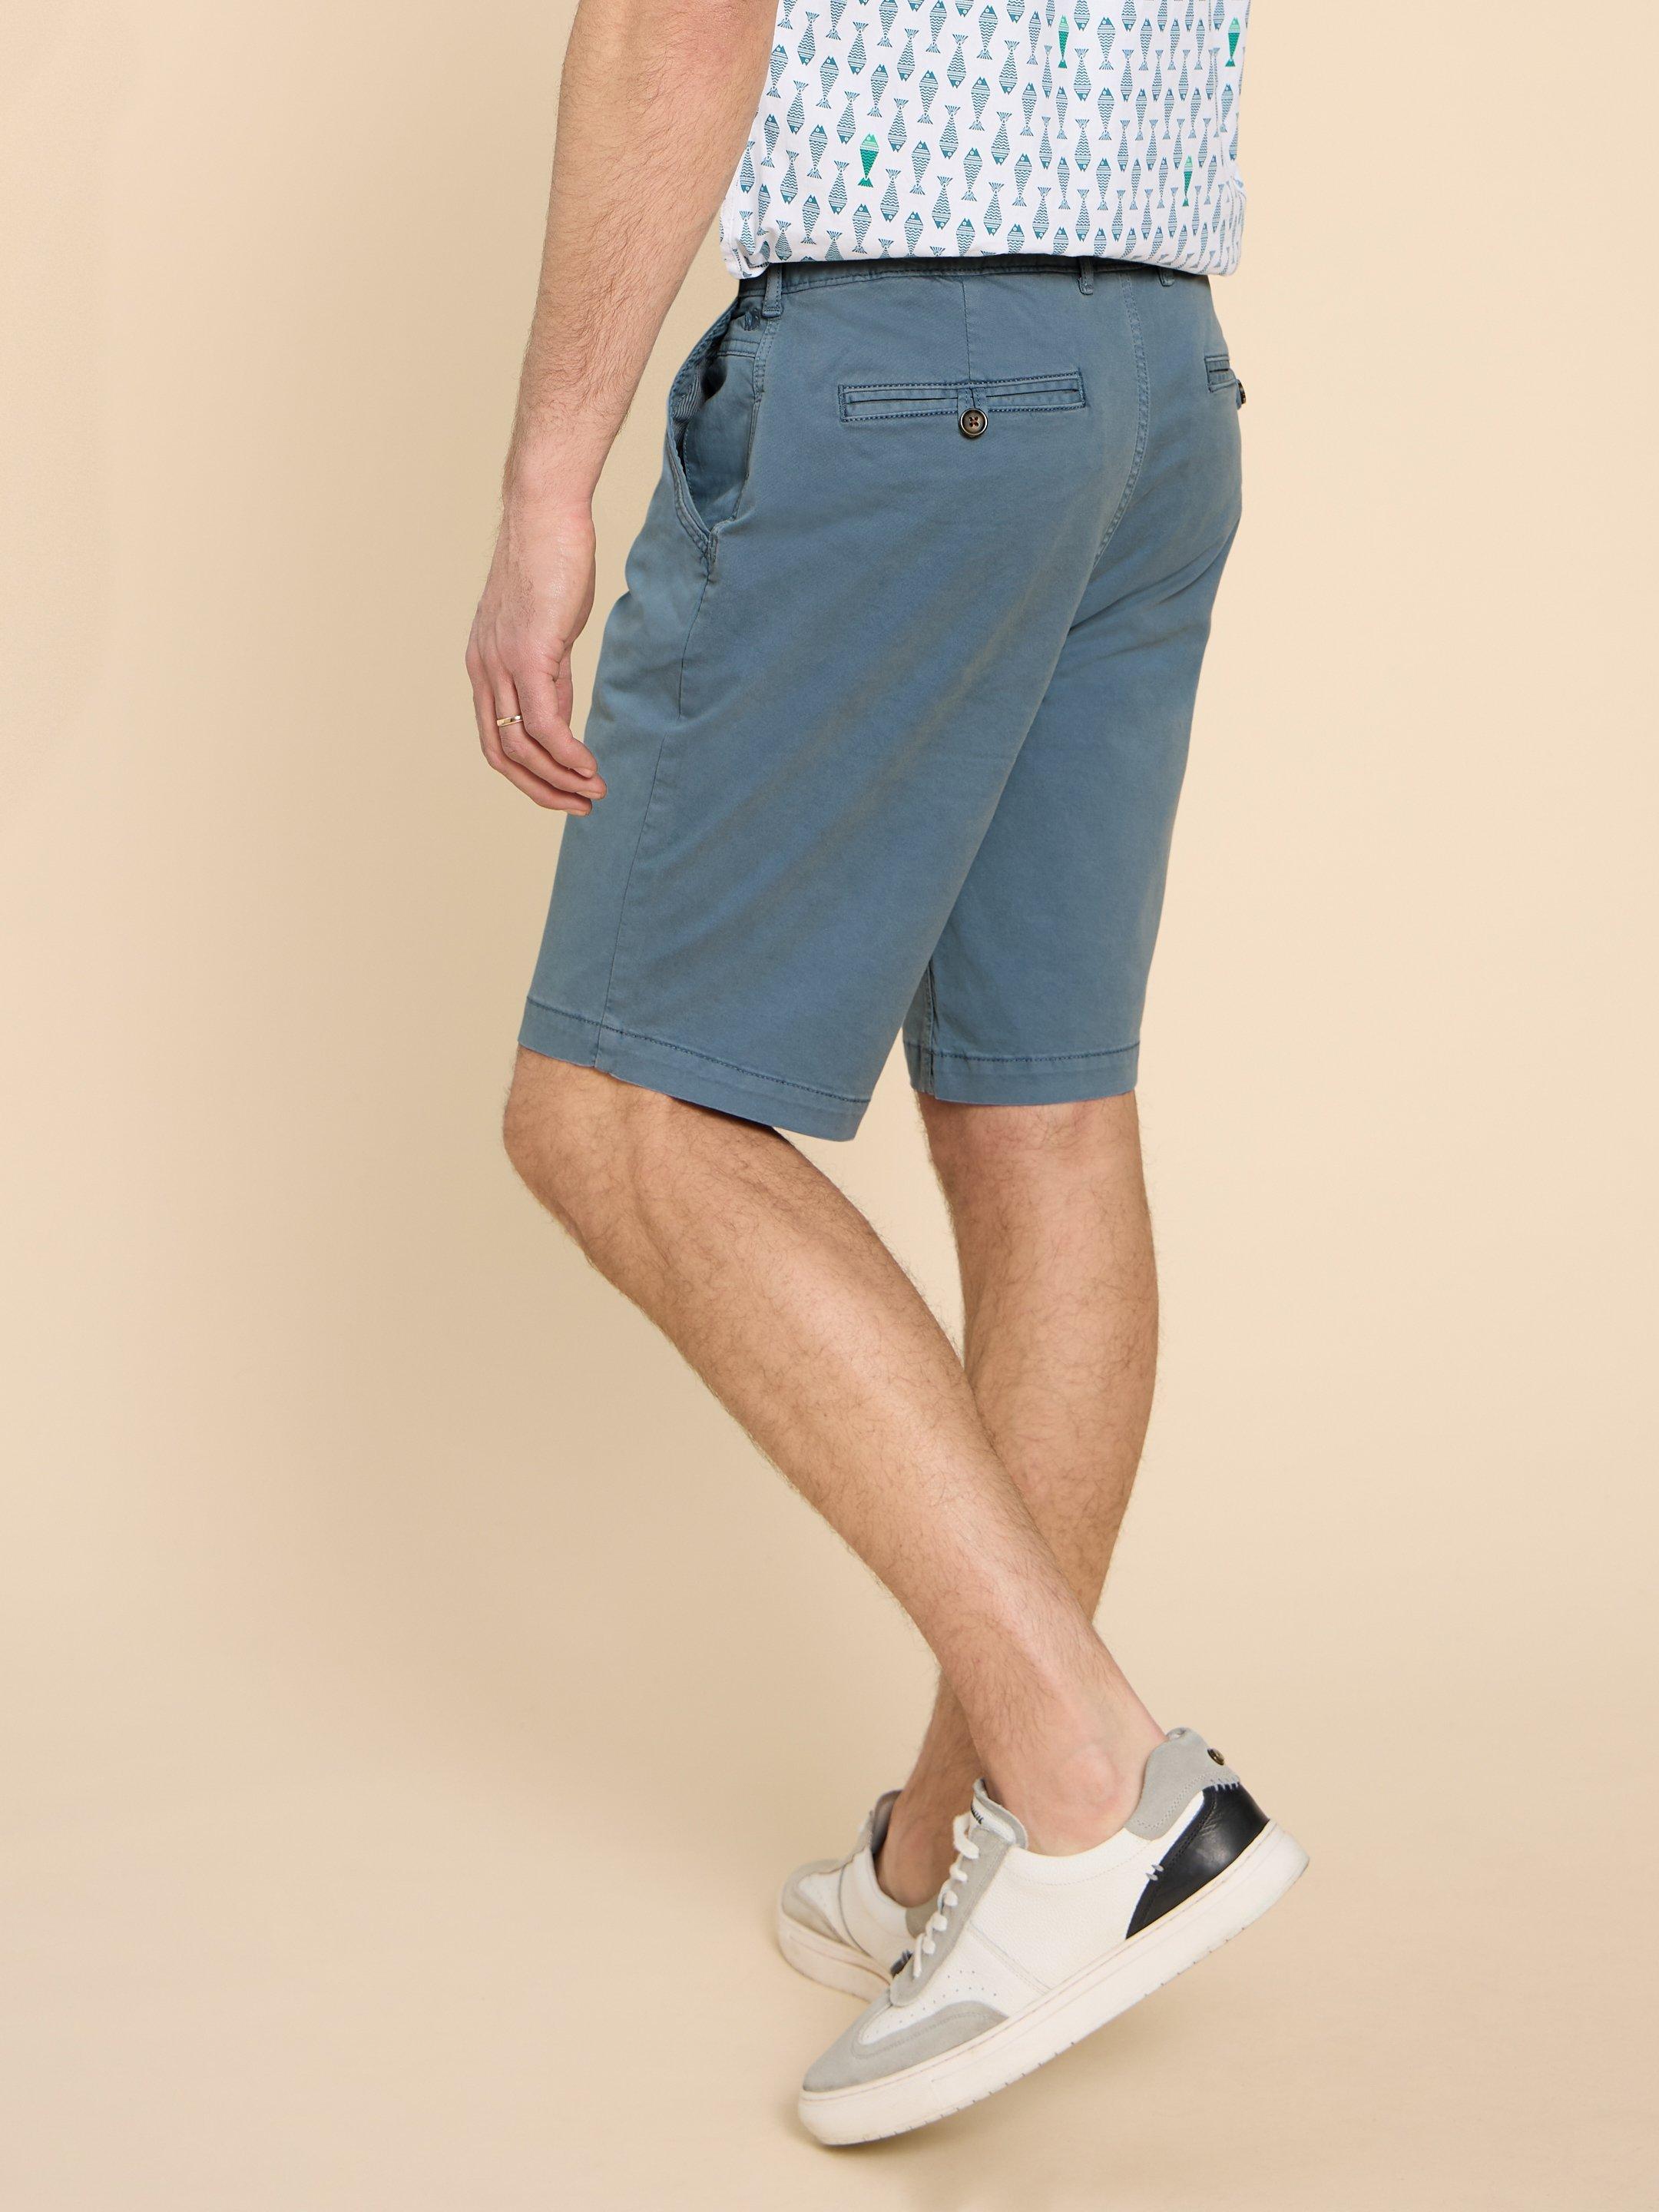 Sutton Organic Chino Short in MID BLUE - MODEL BACK